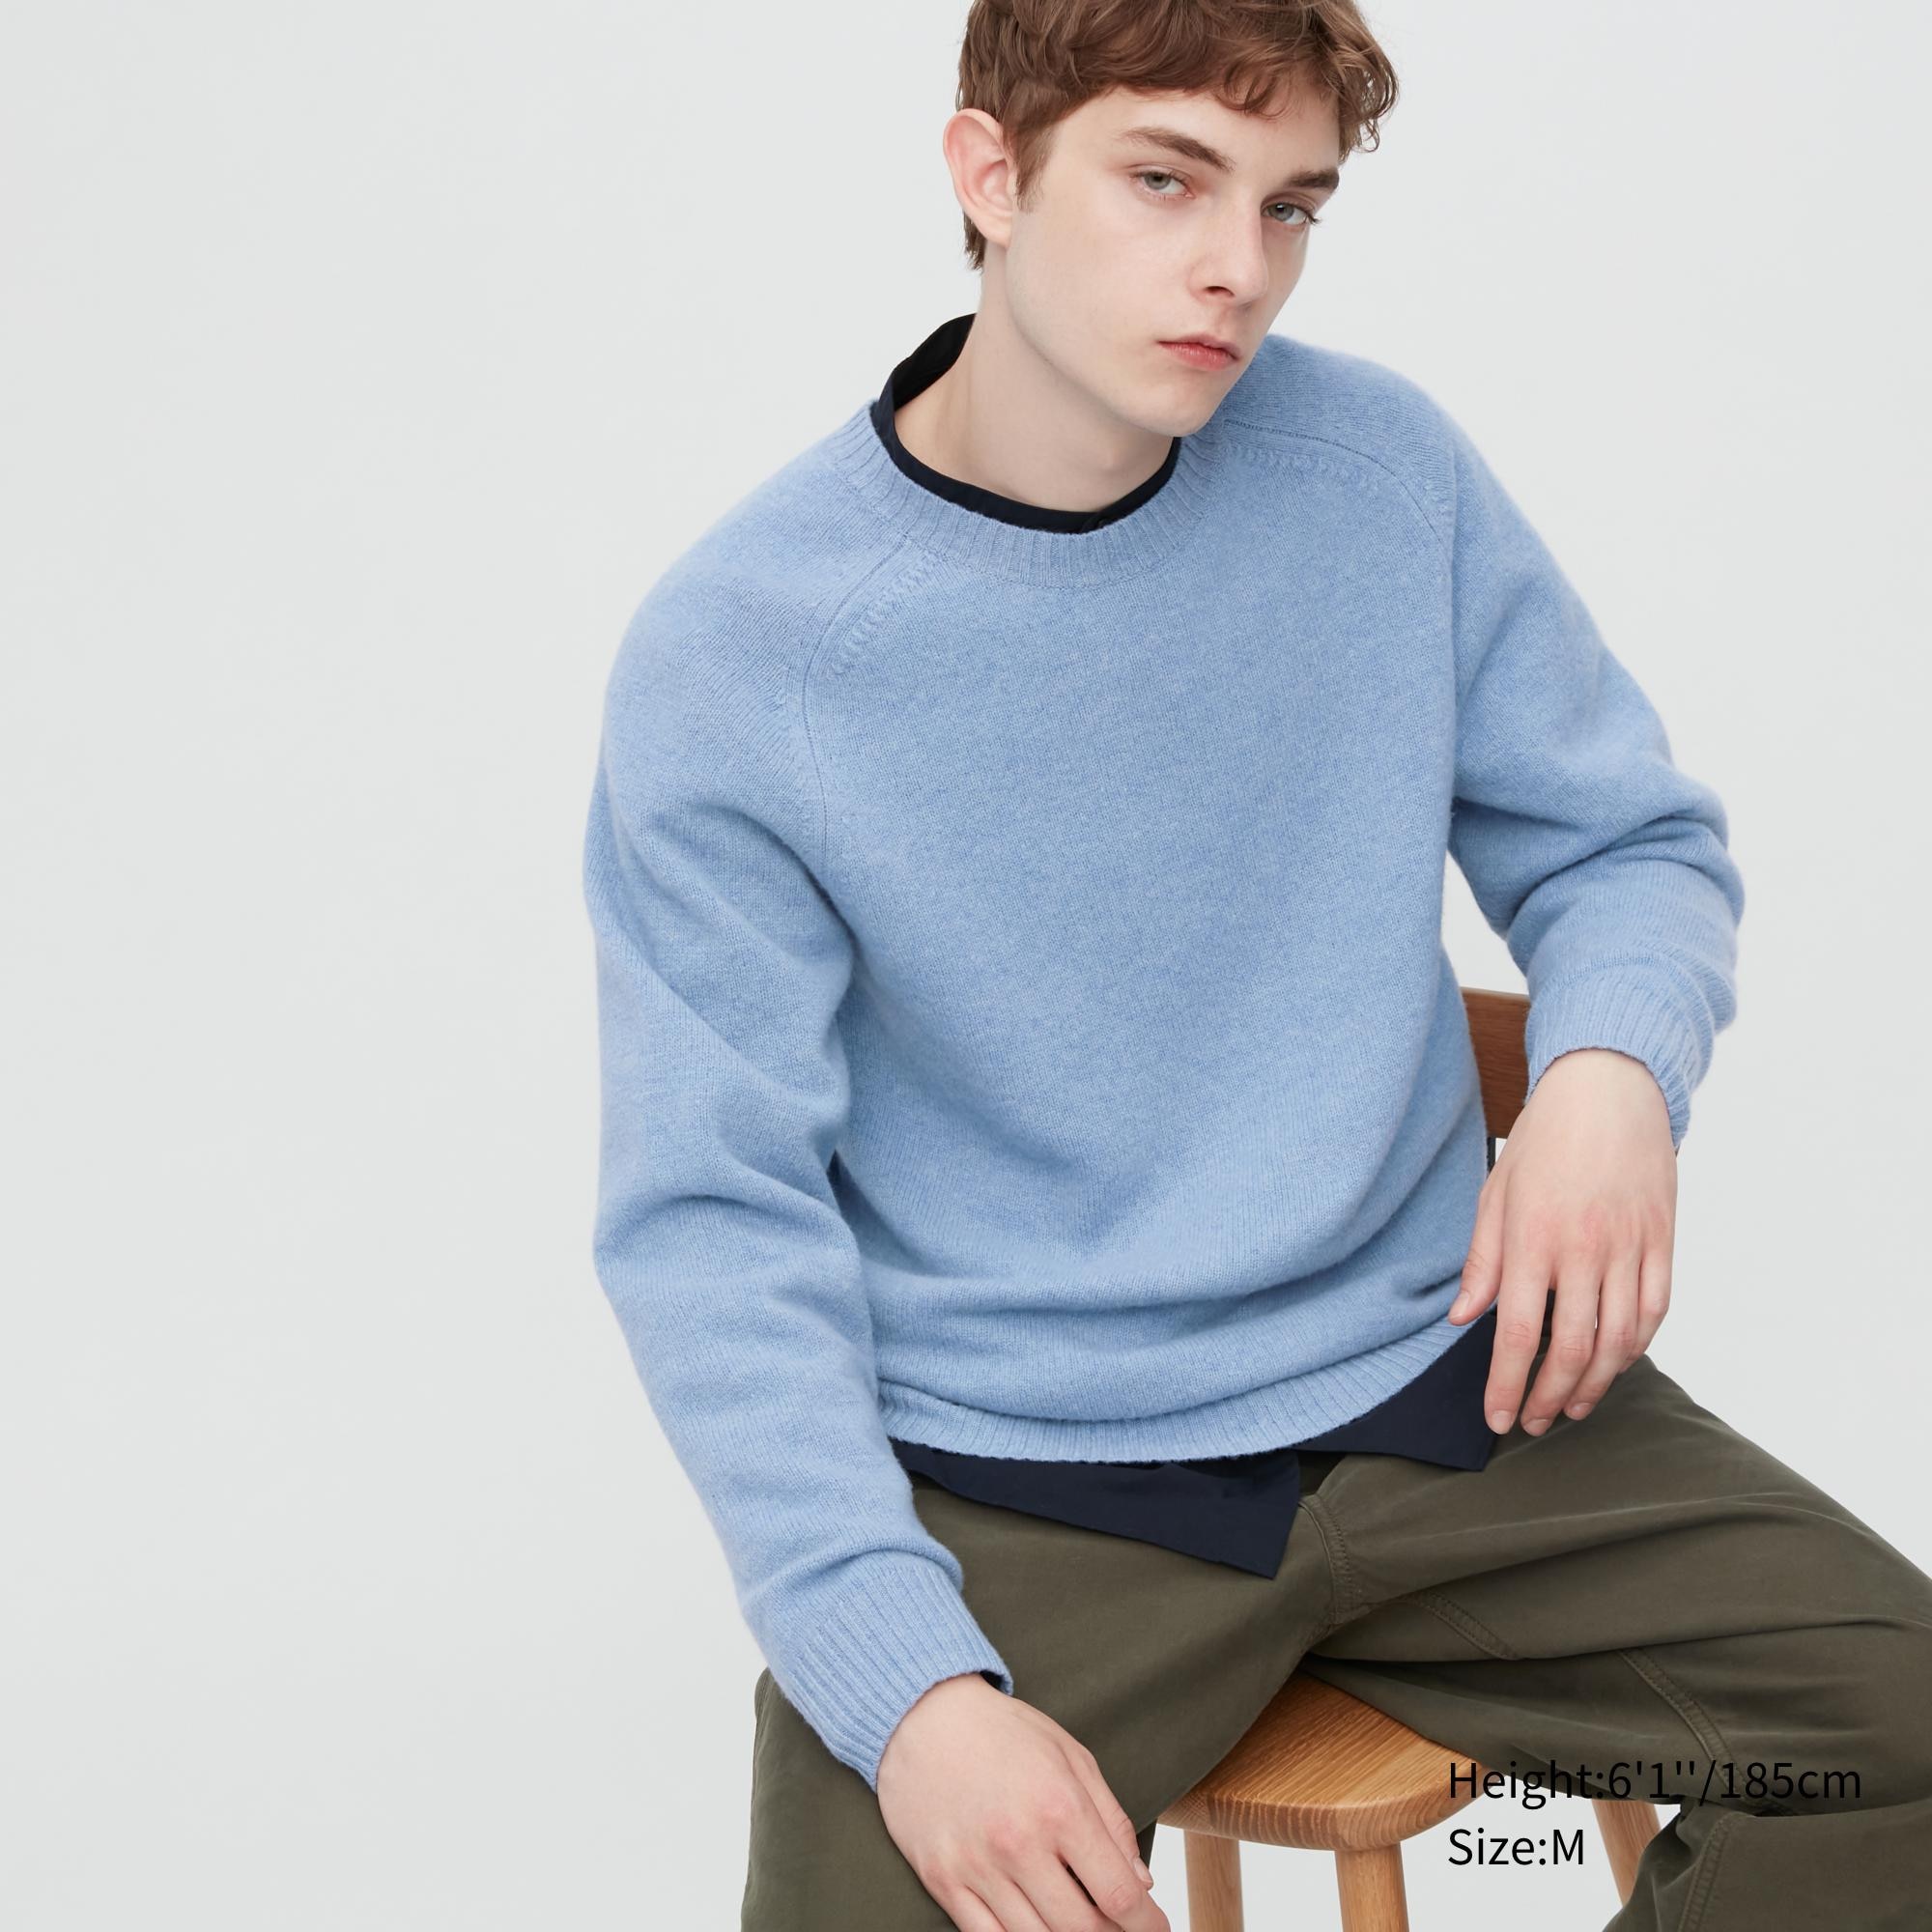 Mens knitted jumpers cardigans  sweaters  UNIQLO UK